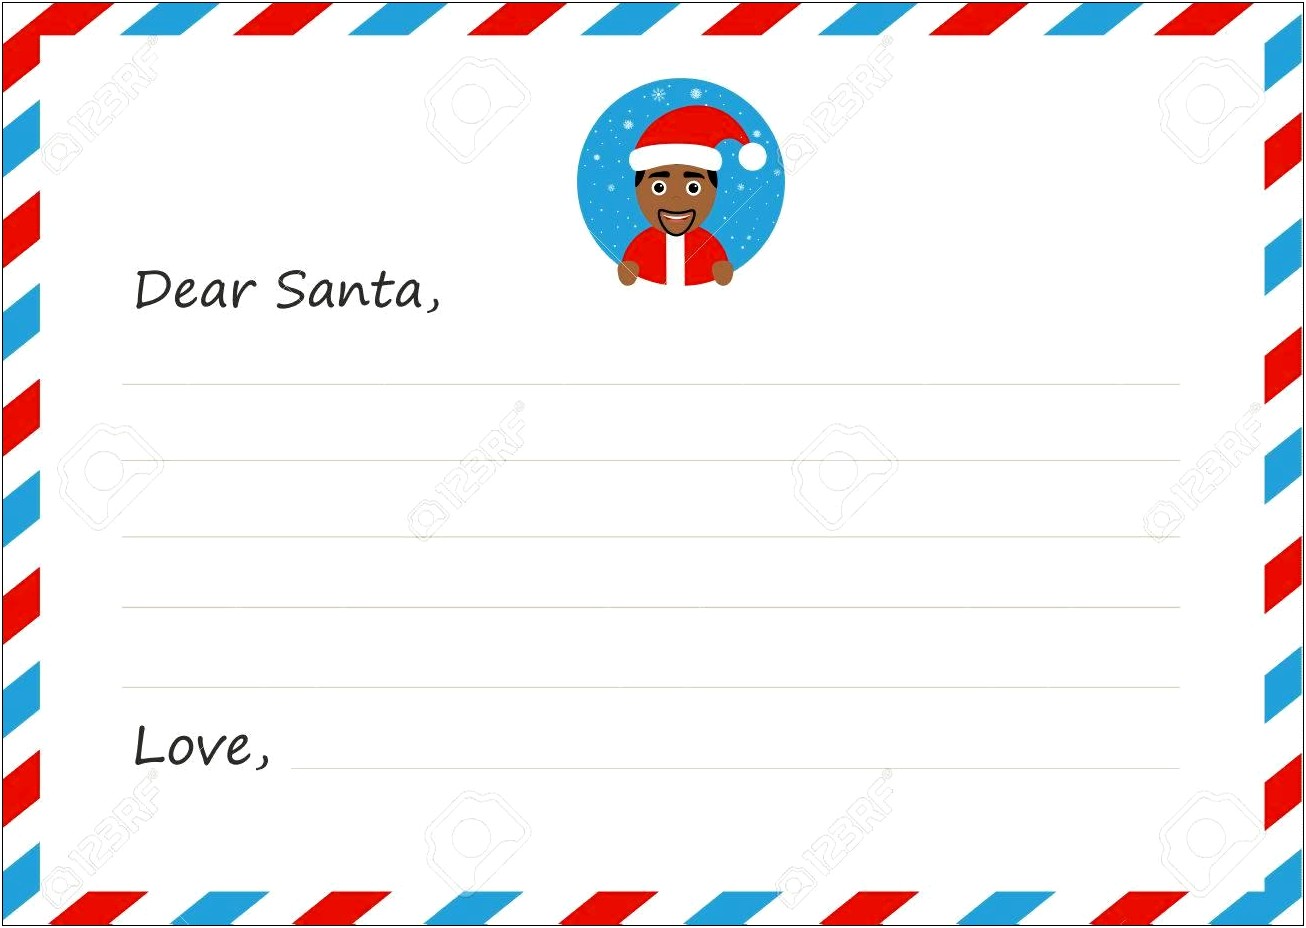 New Year's Letter Template Free